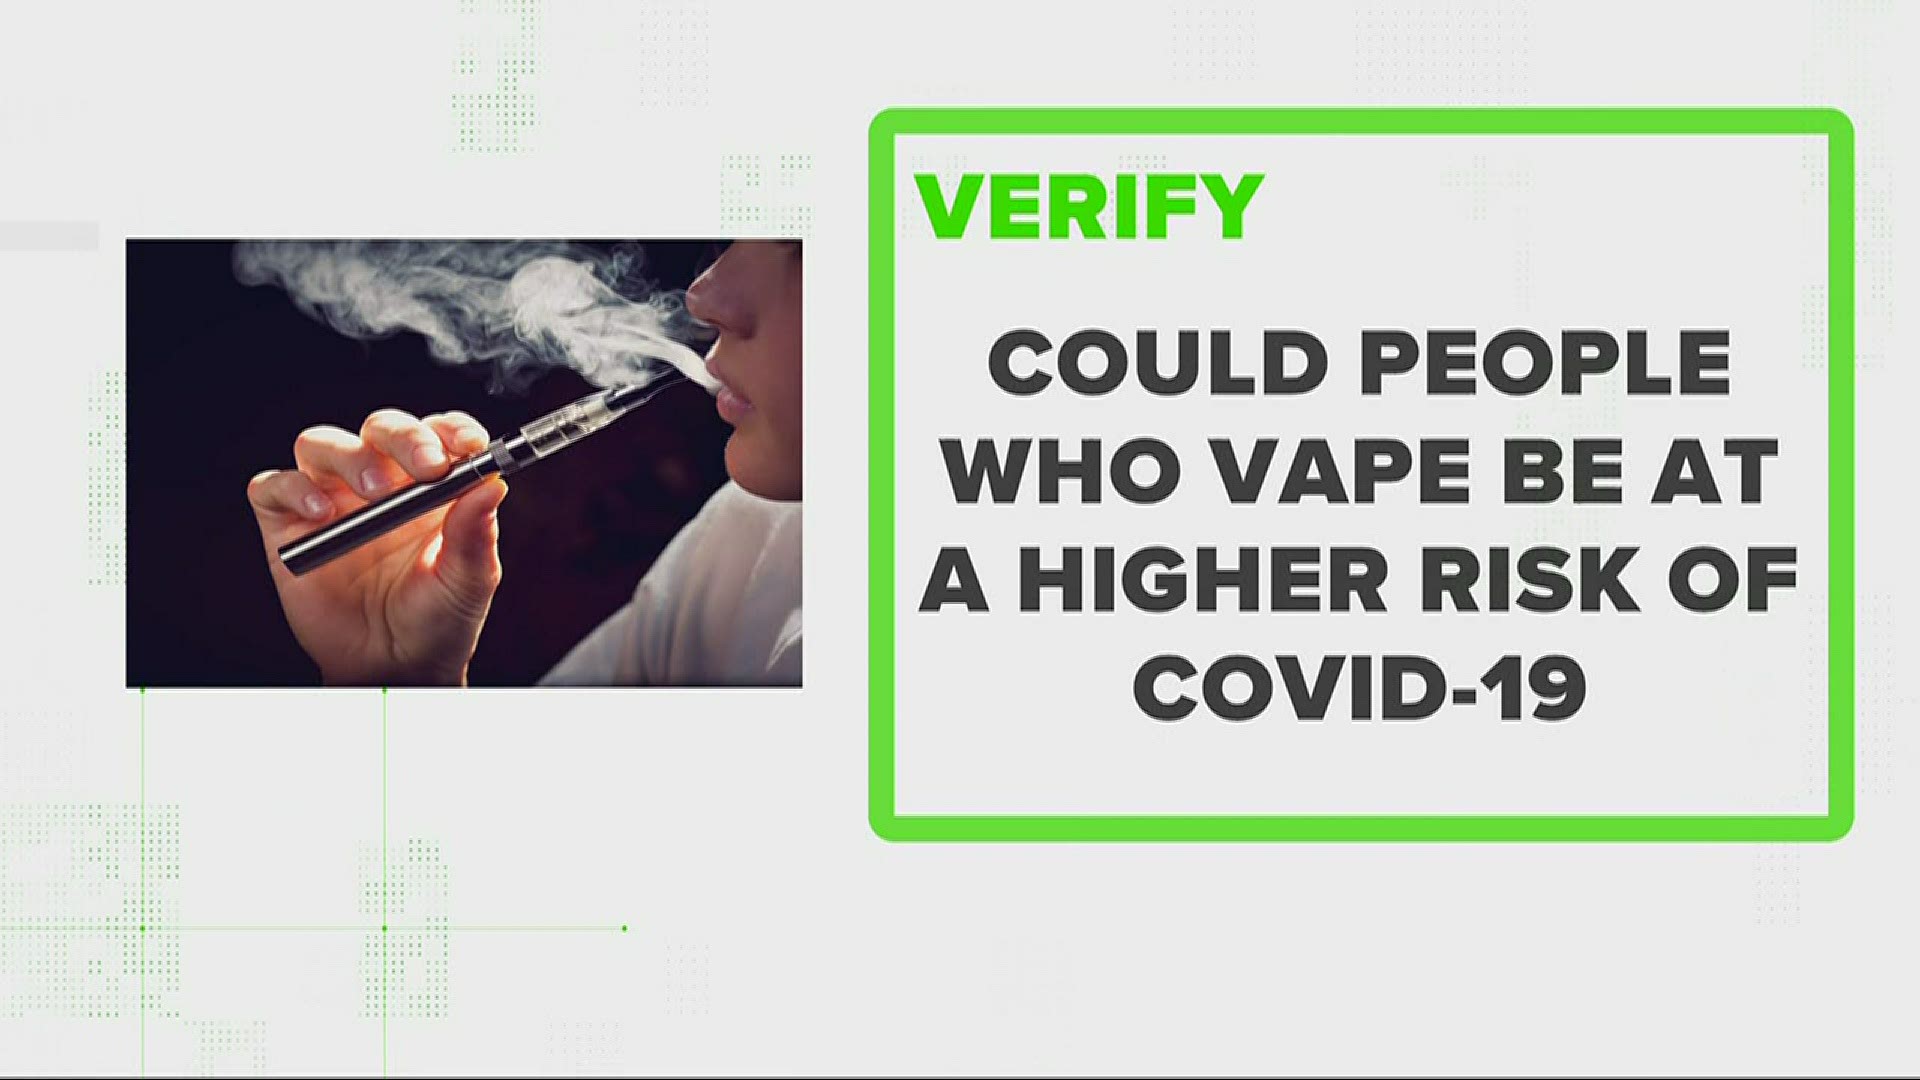 We know COVID-19 hits some people harder than others, but are people who vape more at risk for serious symptoms?